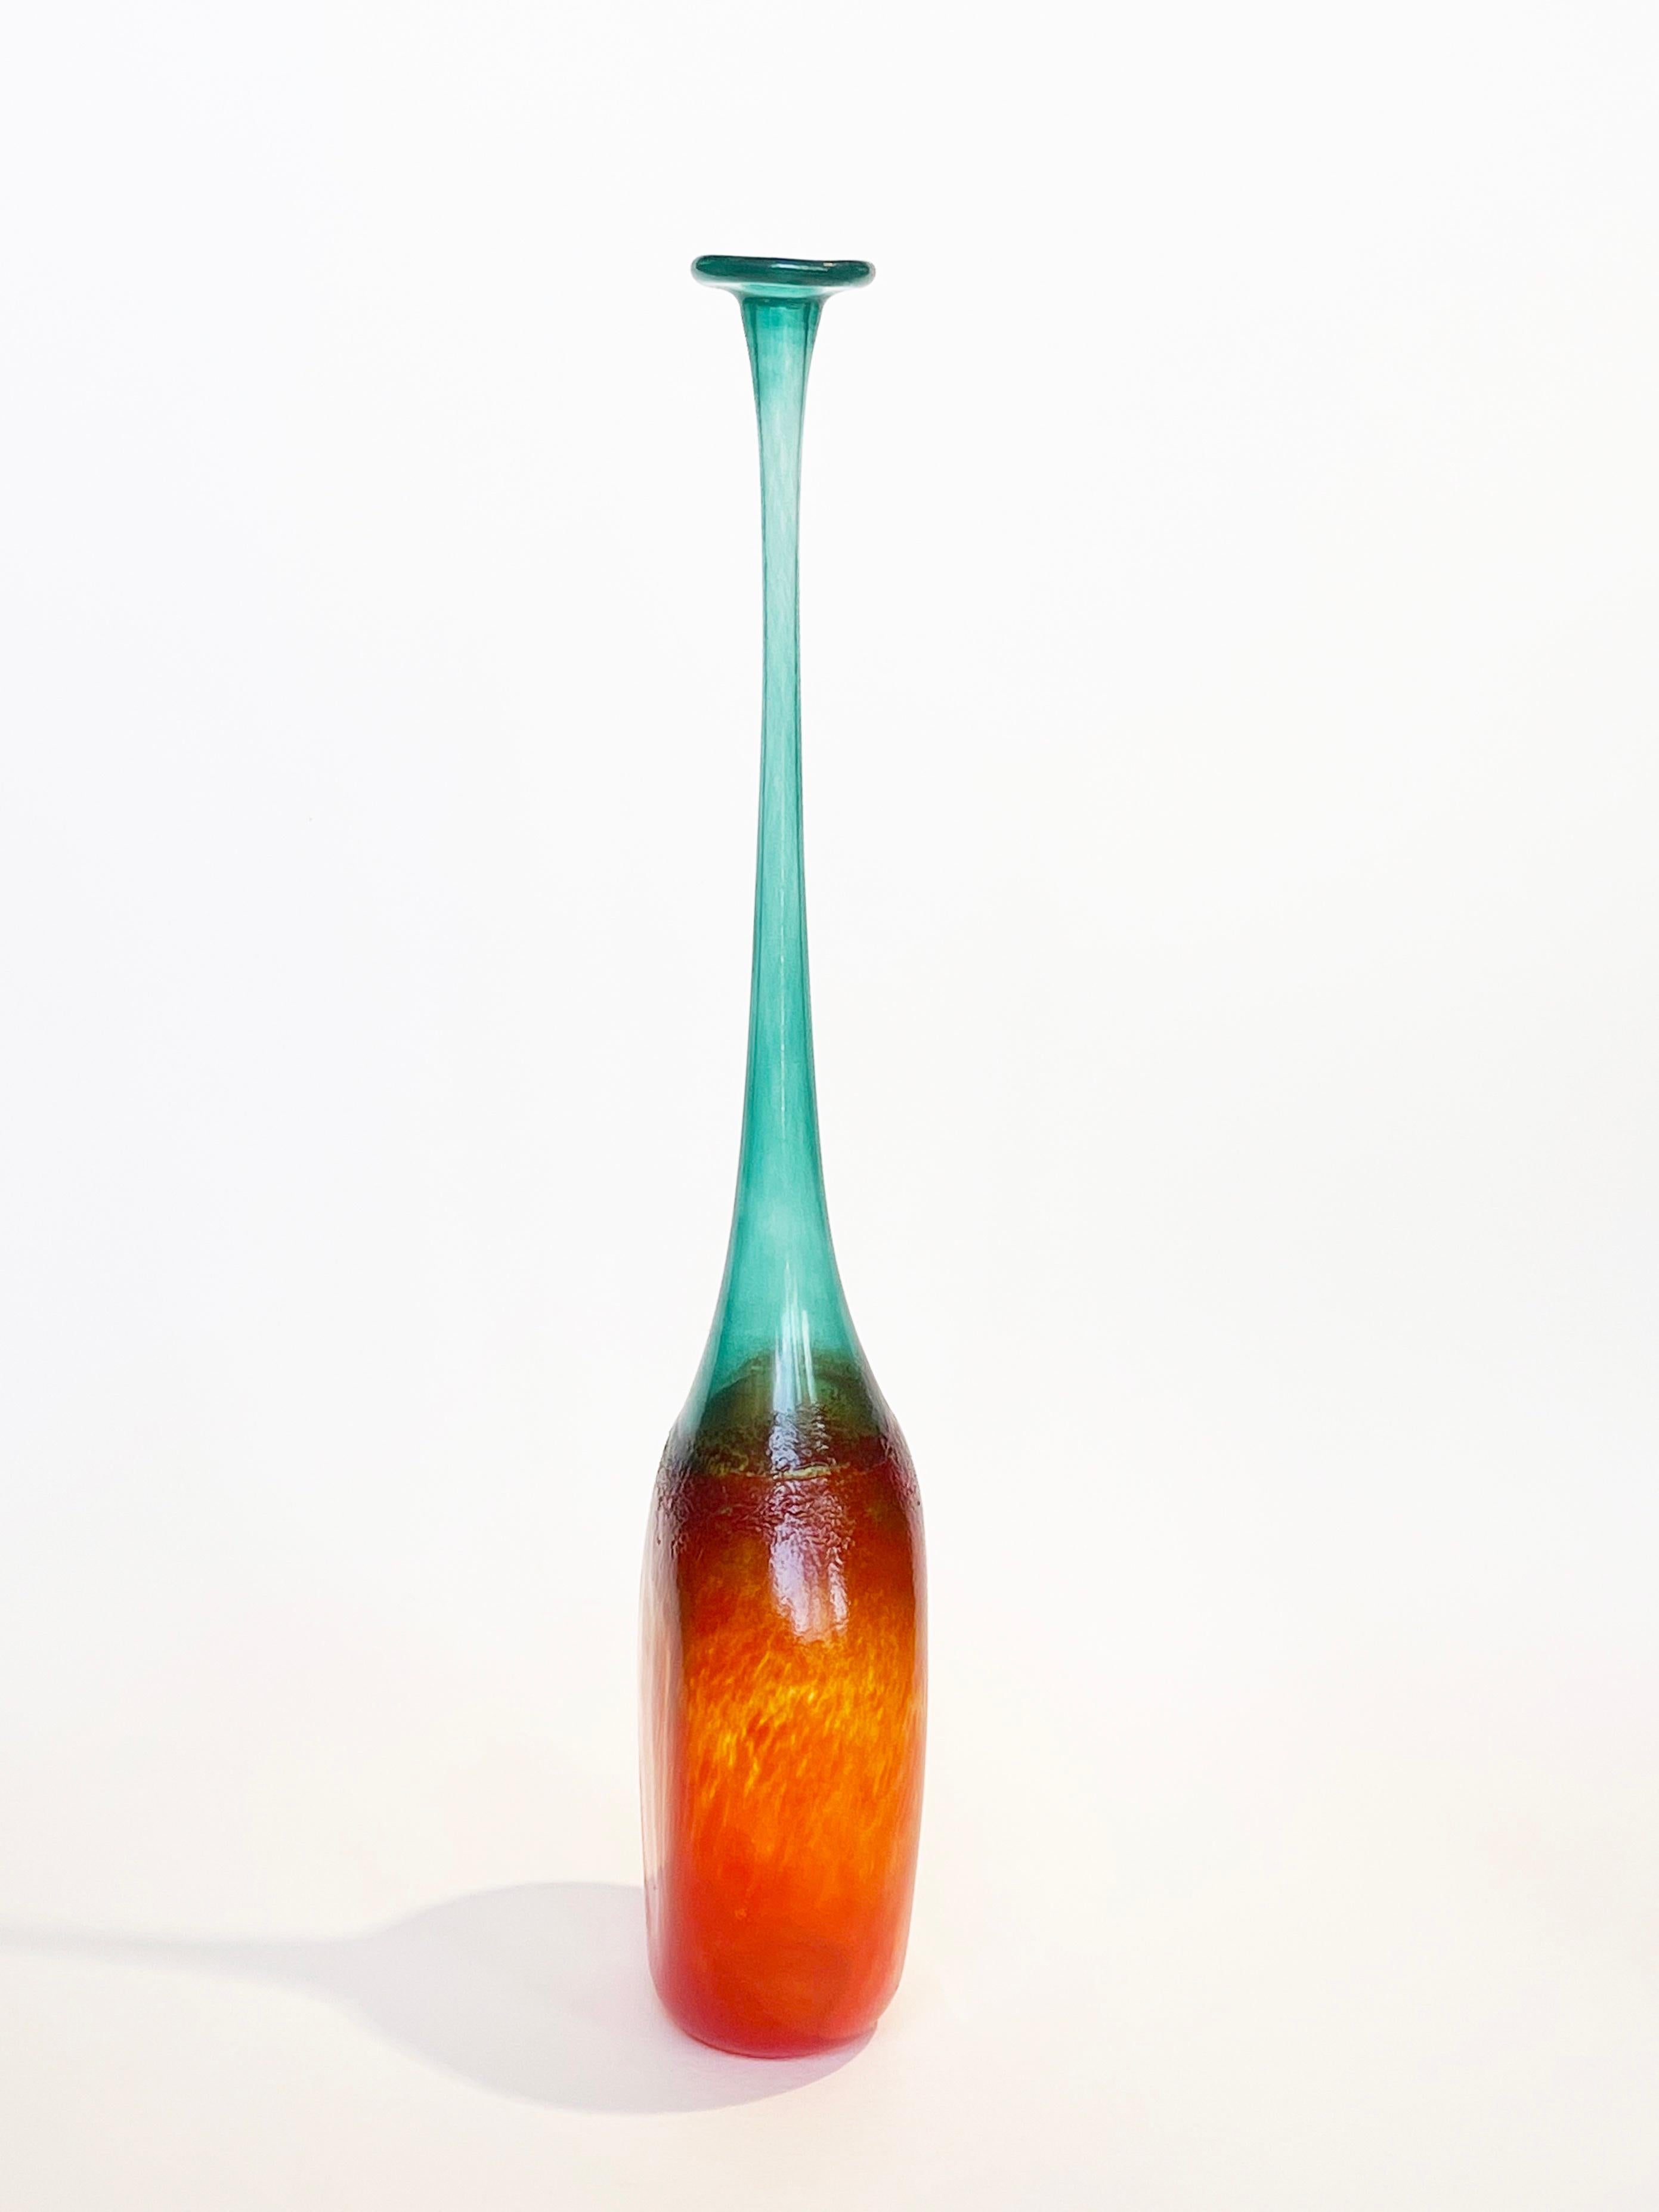 Mid-Century Modern 1980s Glass Vase Murano Vibe Turquoise Orange by or after Bertil Vallien, Sweden For Sale